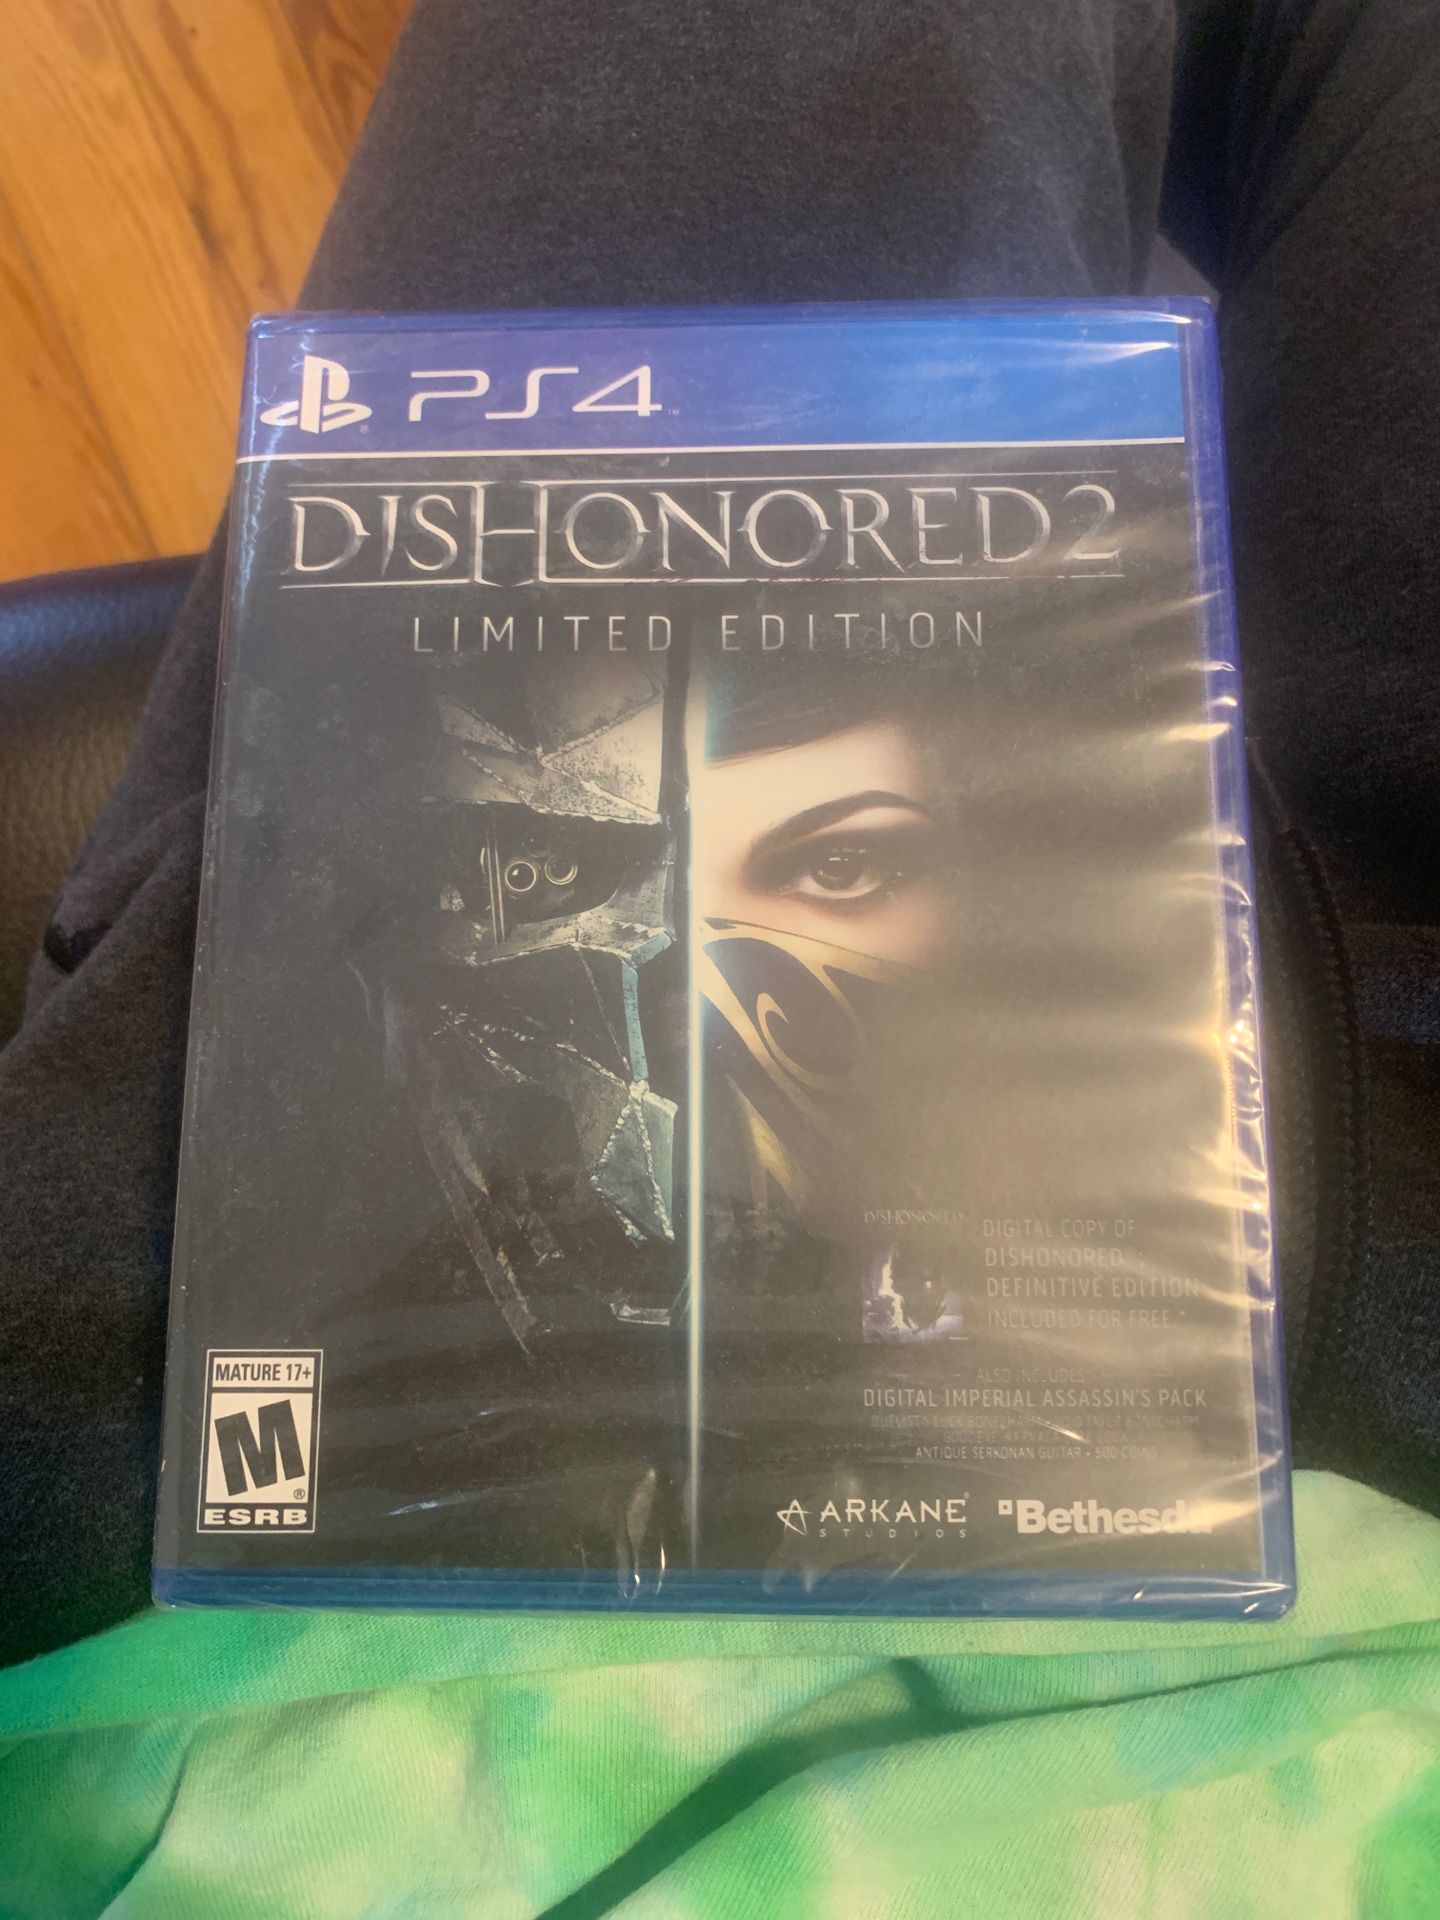 Dishonored 2 Limited Edition (unopened)